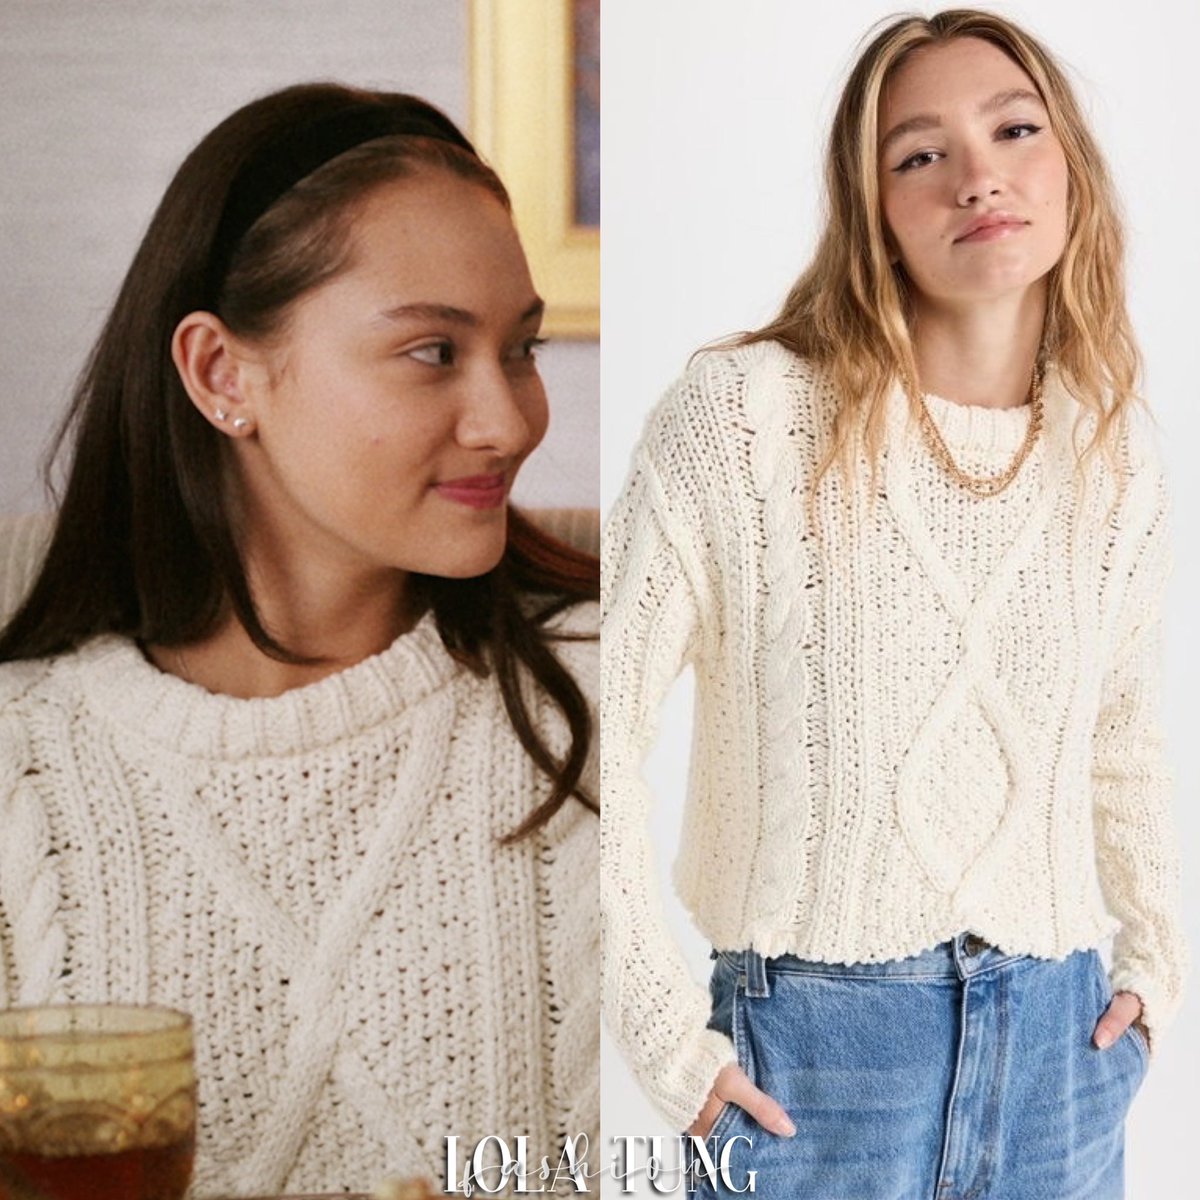 Lola Tung as Belly Conklin wears the #FreePeople ‘Cutting Edge Cable Pullover’ ($148) in #TheSummerITurnedPretty Season 2.